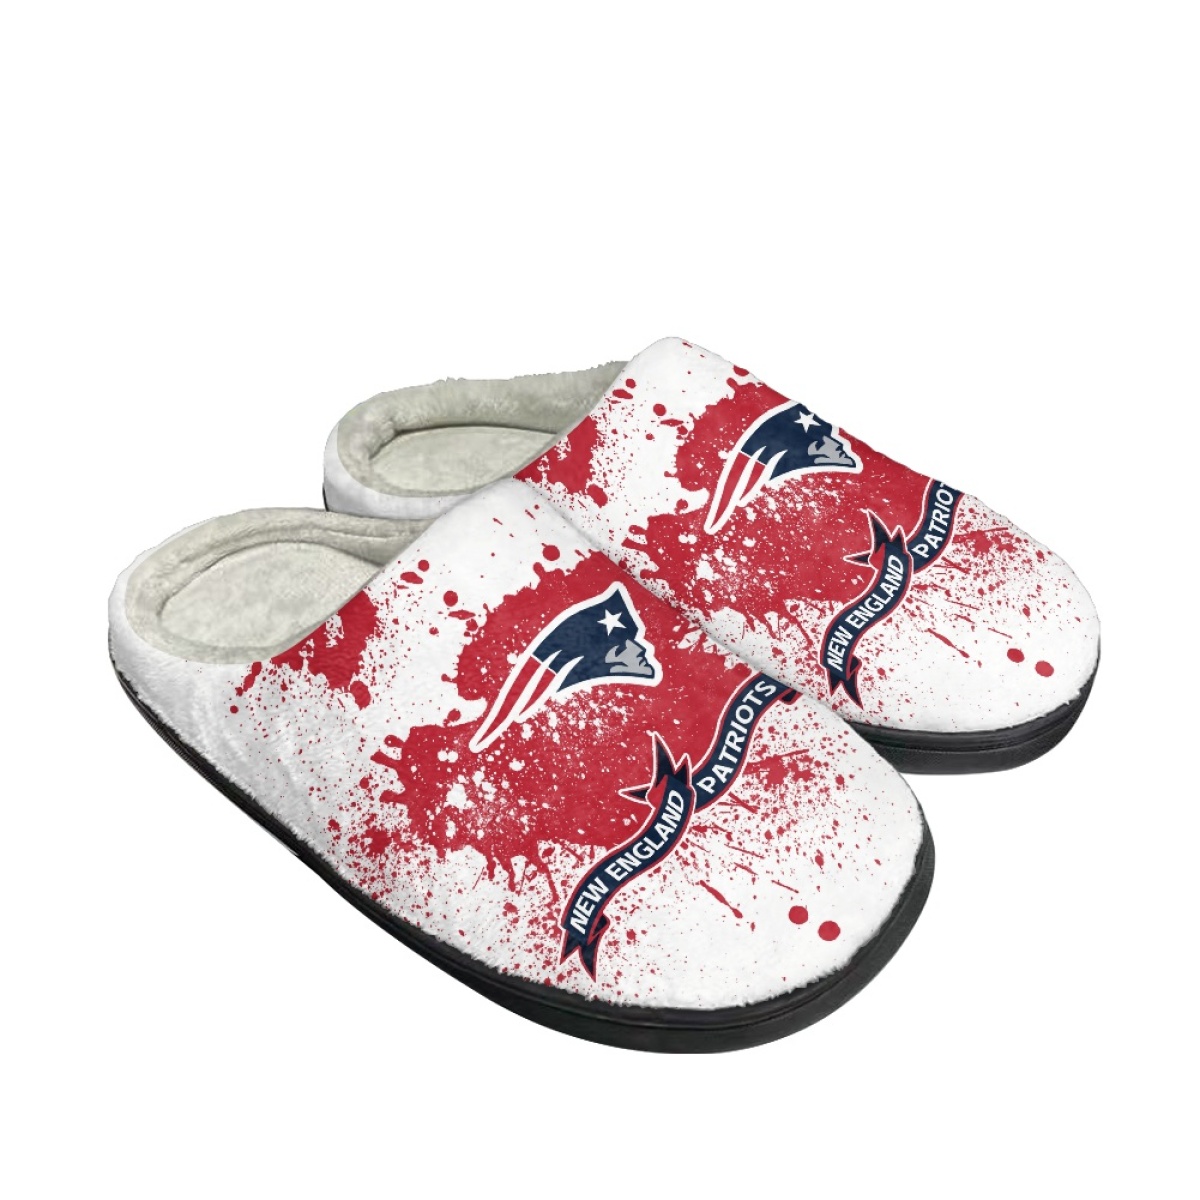 Men's New England Patriots Slippers/Shoes 006